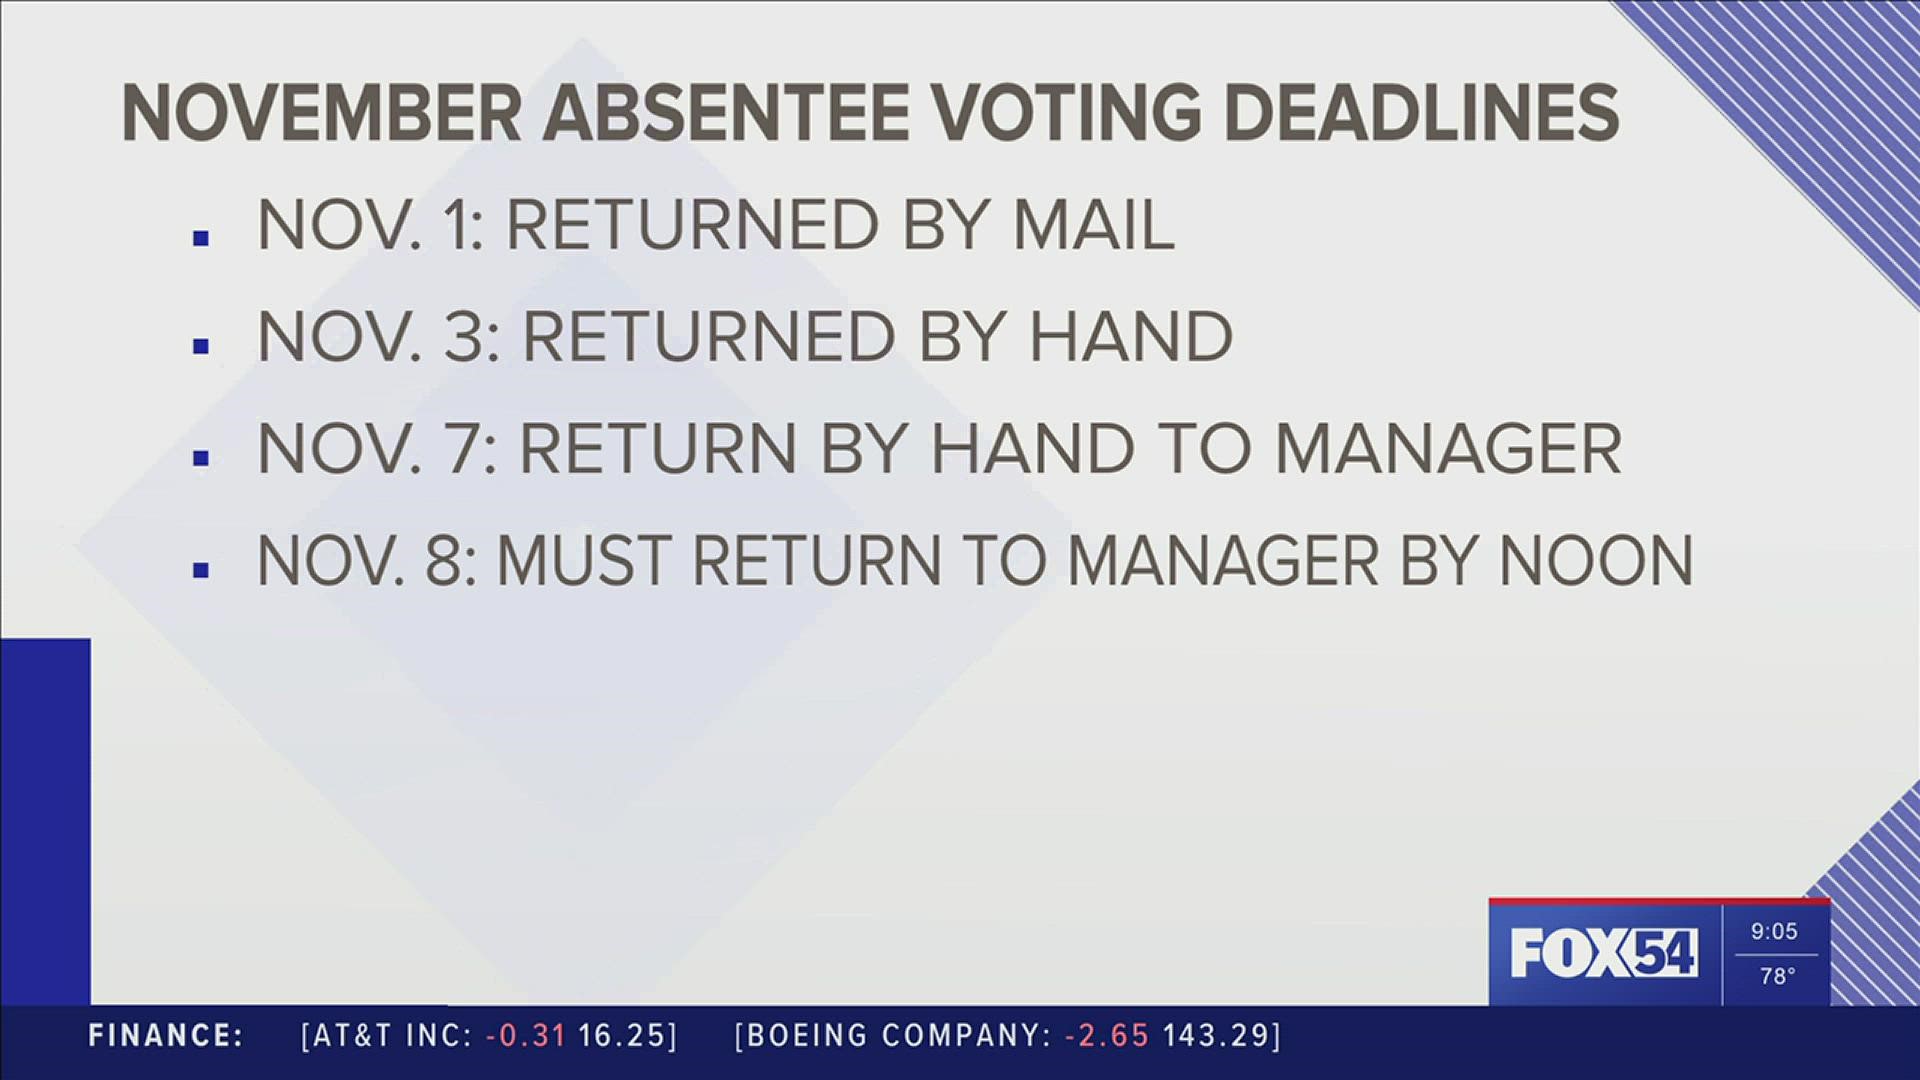 The absentee voting period for Alabama's November general election is underway.